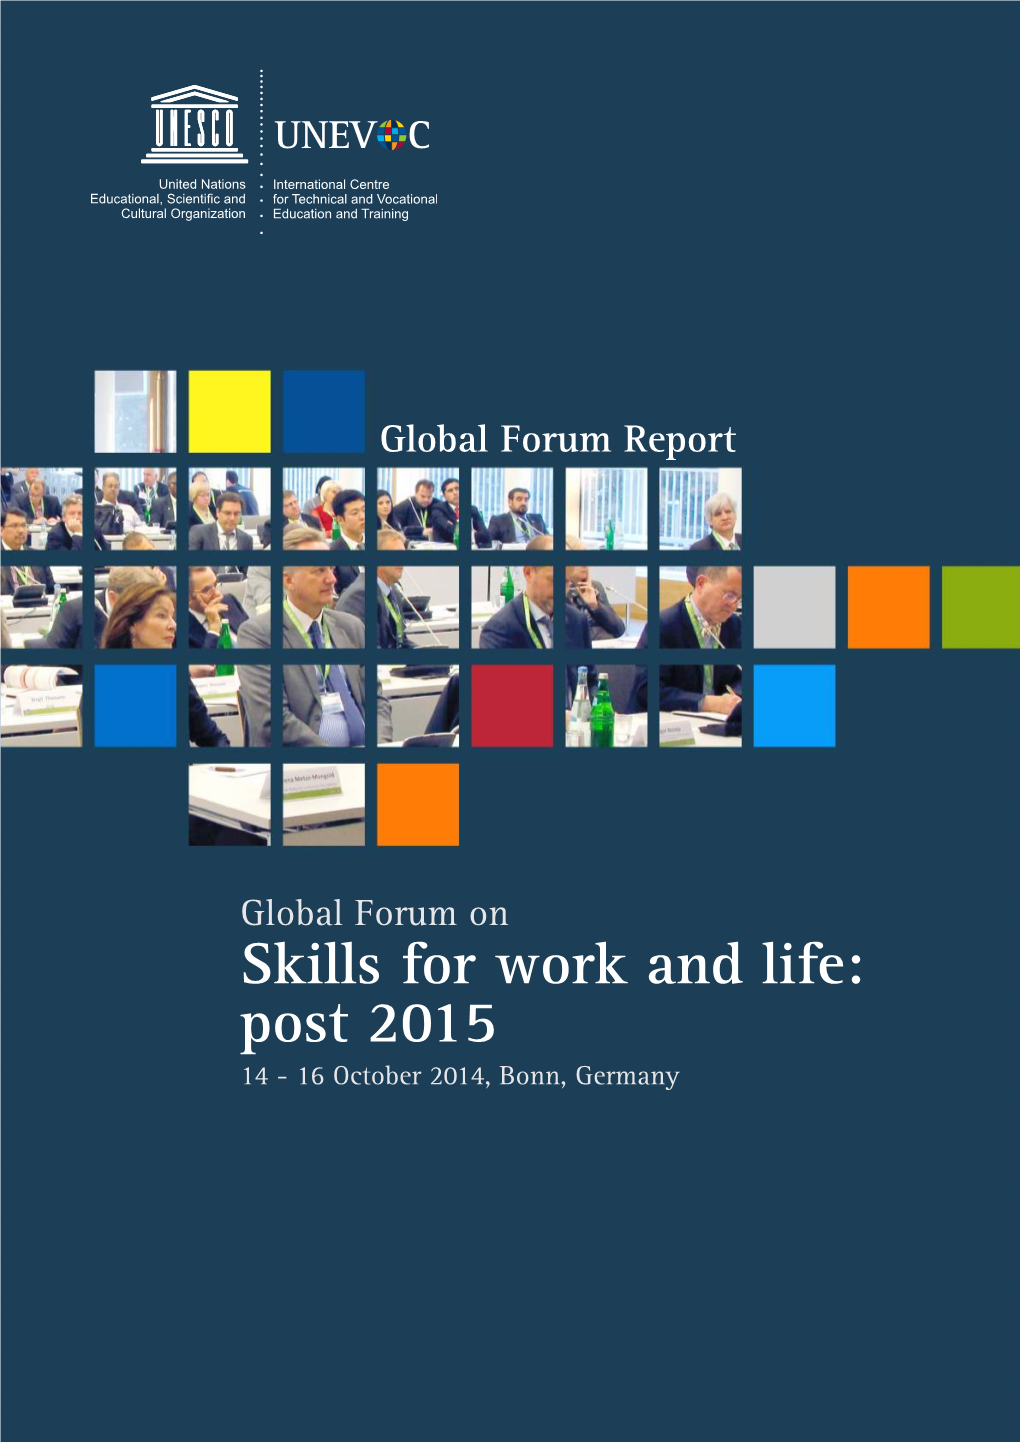 Skills for Work and Life: Post 2015 14 - 16 October 2014, Bonn, Germany Organized By